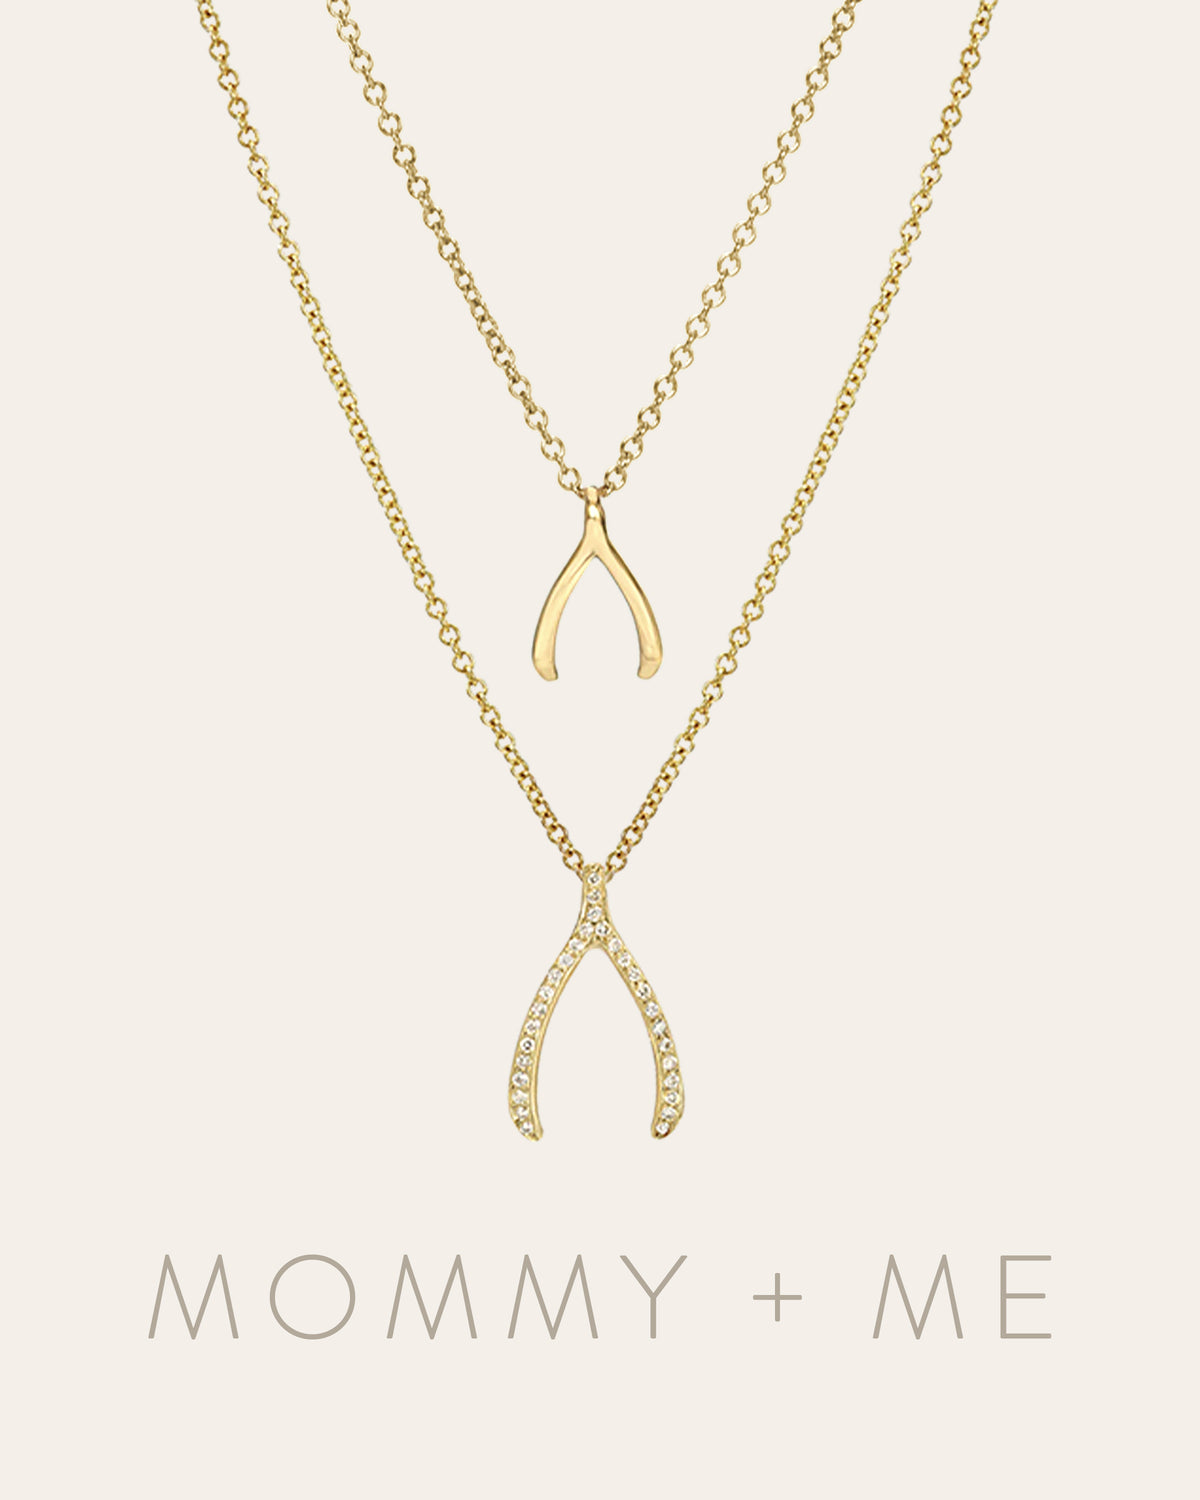 Wishbone Necklaces - Mommy + Me